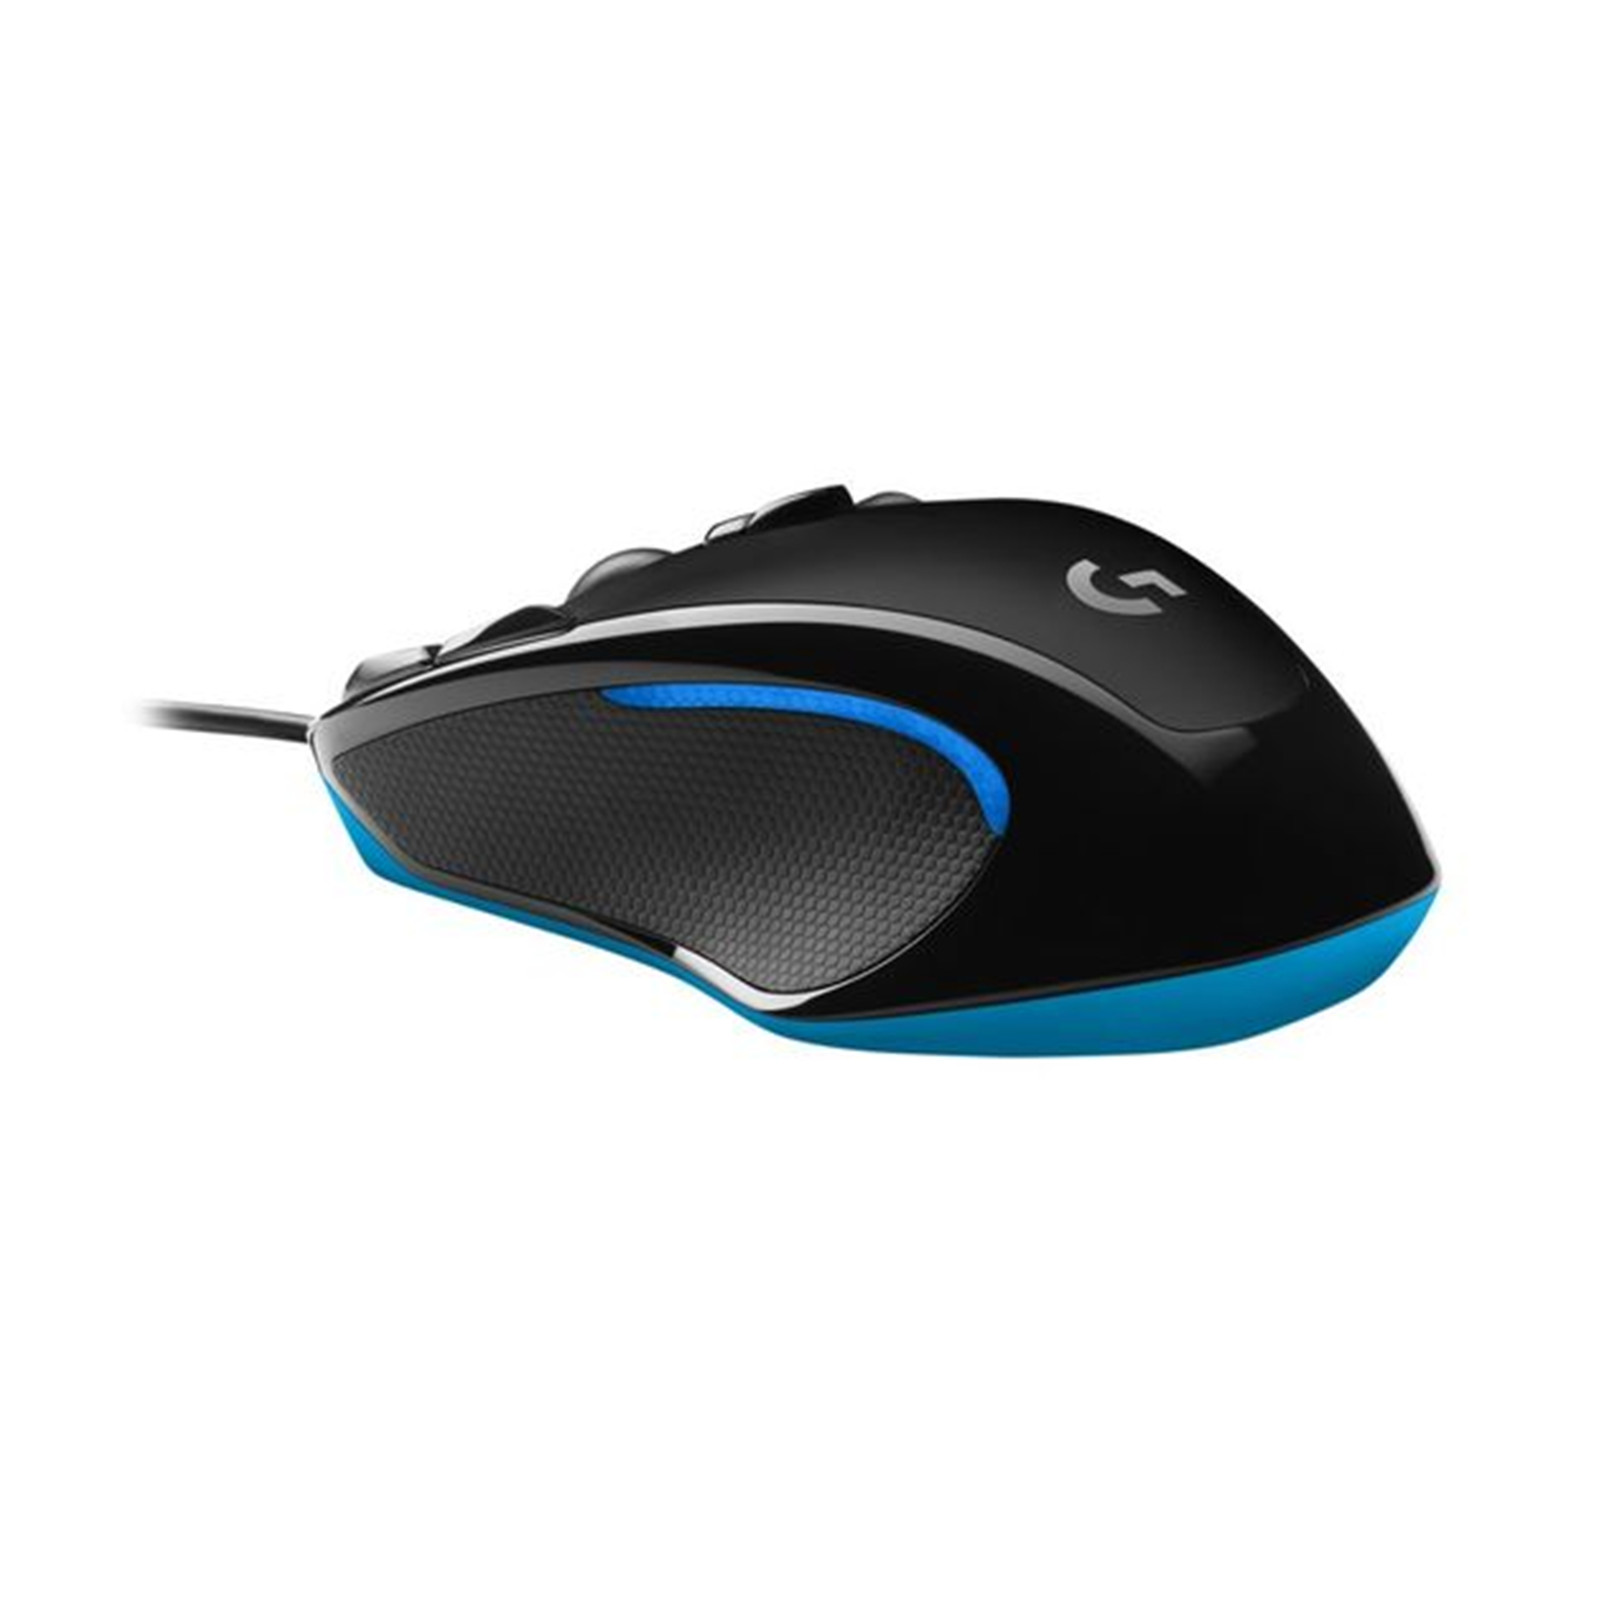 LOGITECH G300 GAMING MOUSE